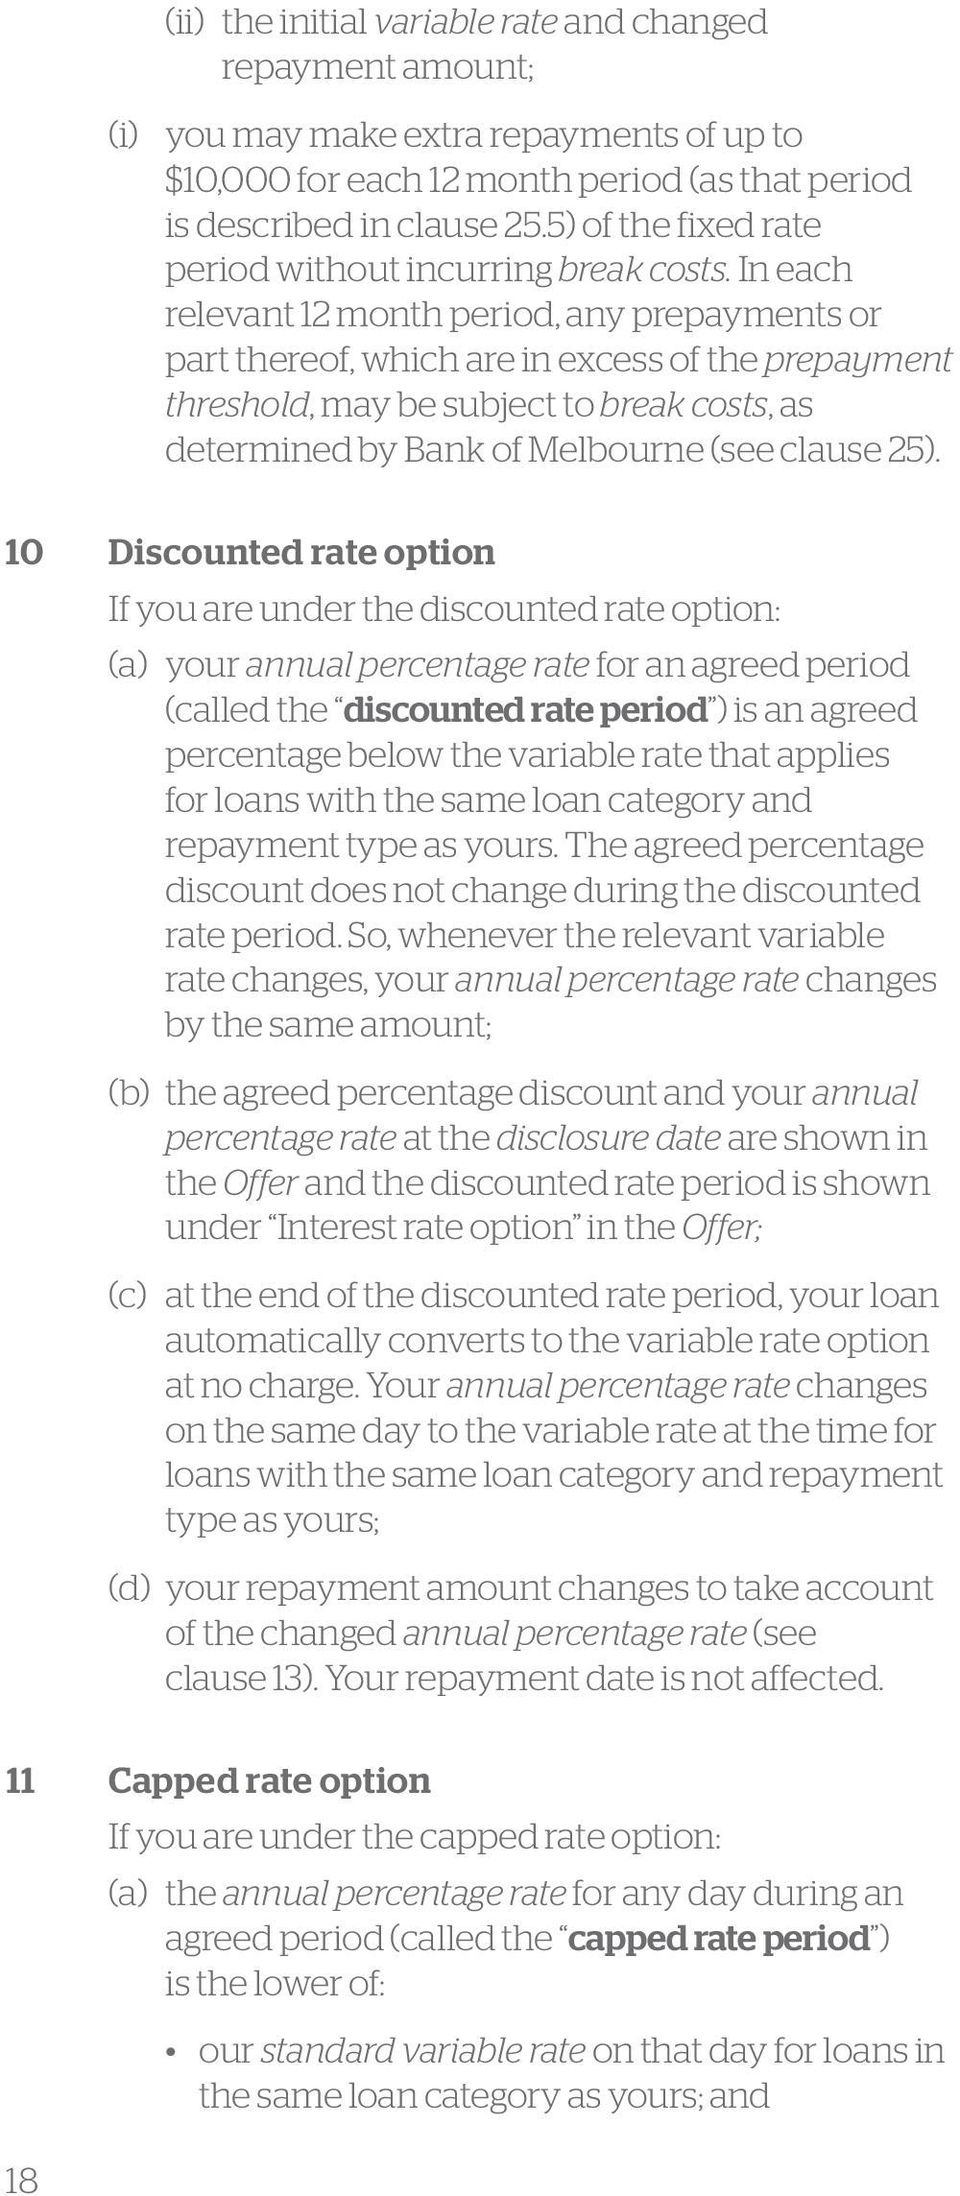 In each relevant 12 month period, any prepayments or part thereof, which are in excess of the prepayment threshold, may be subject to break costs, as determined by Bank of Melbourne (see clause 25).